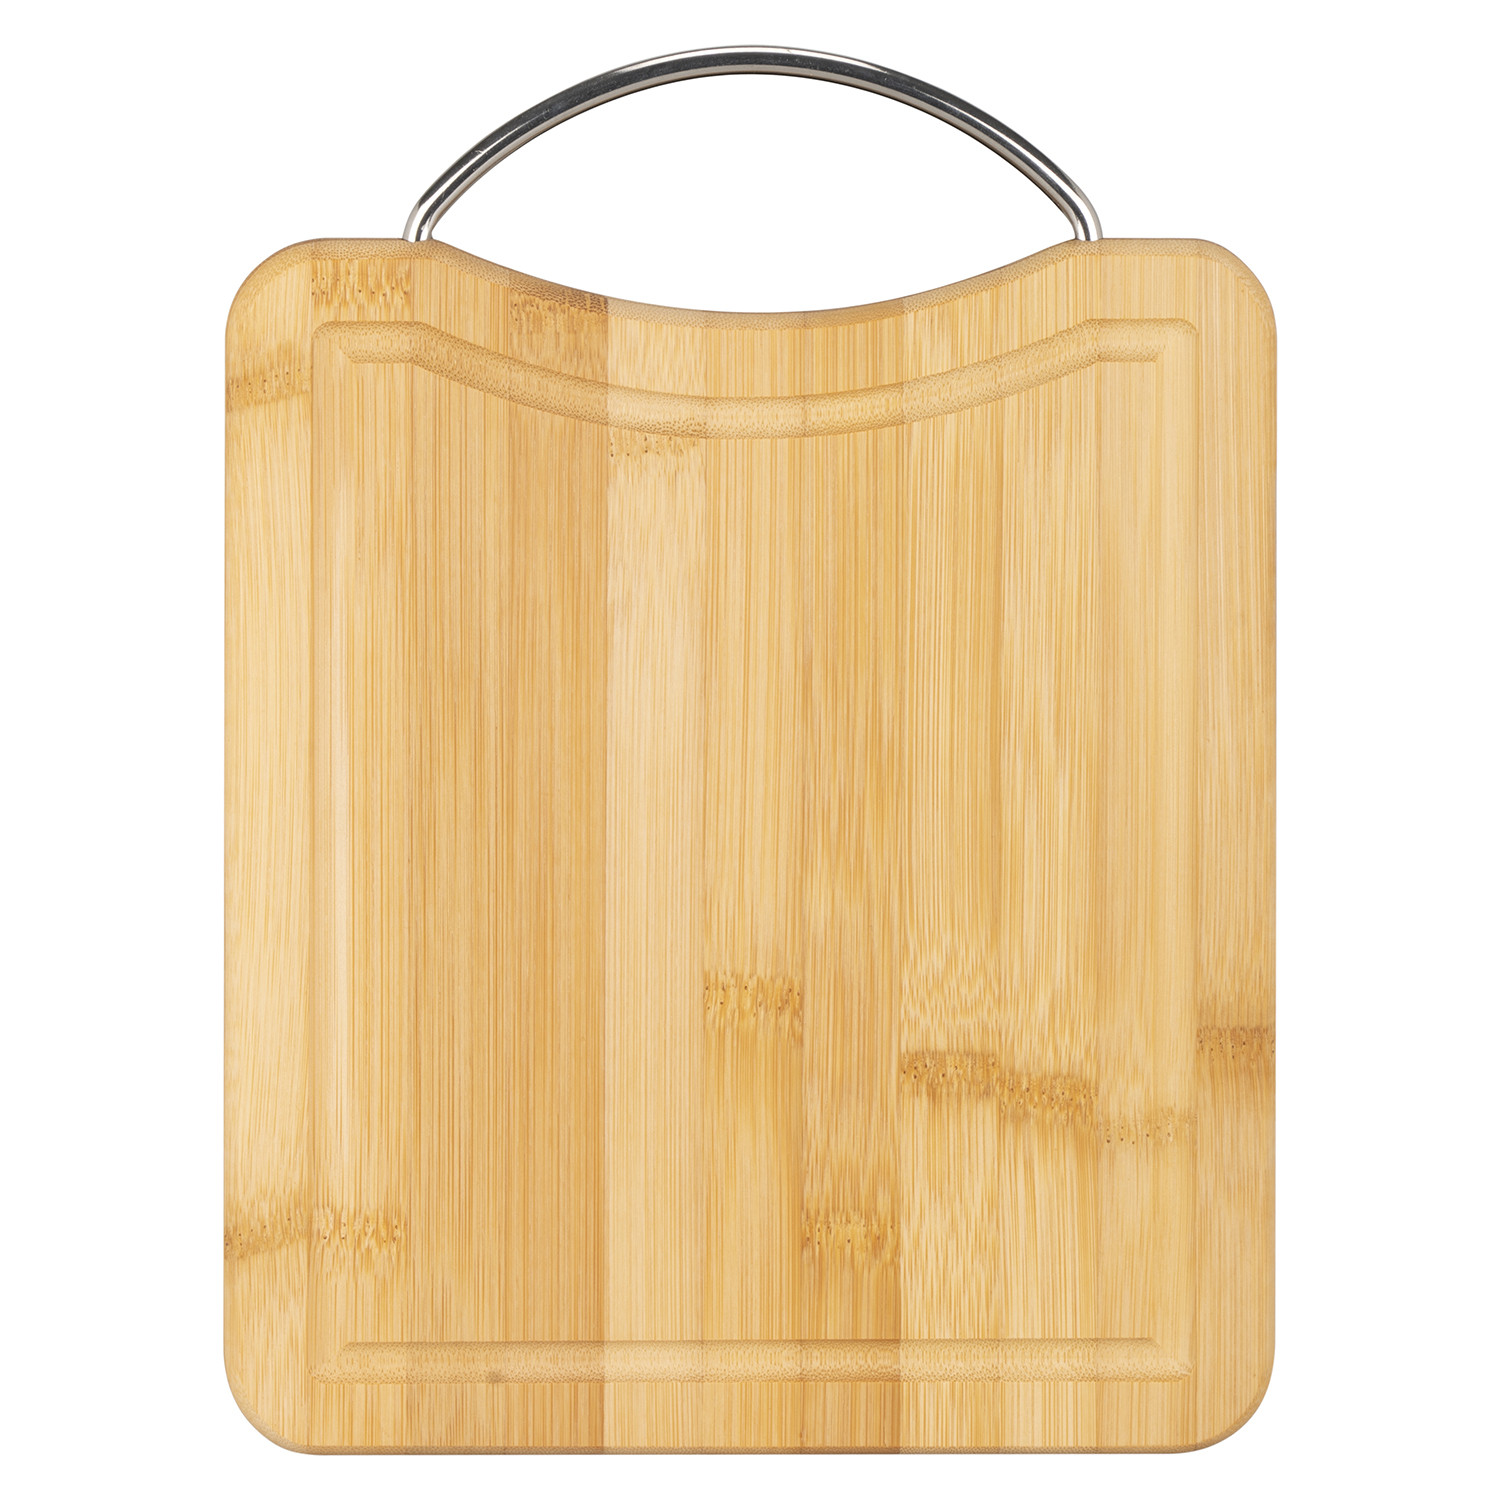 Bamboo Chopping Board with Wire Handle - Small Image 1